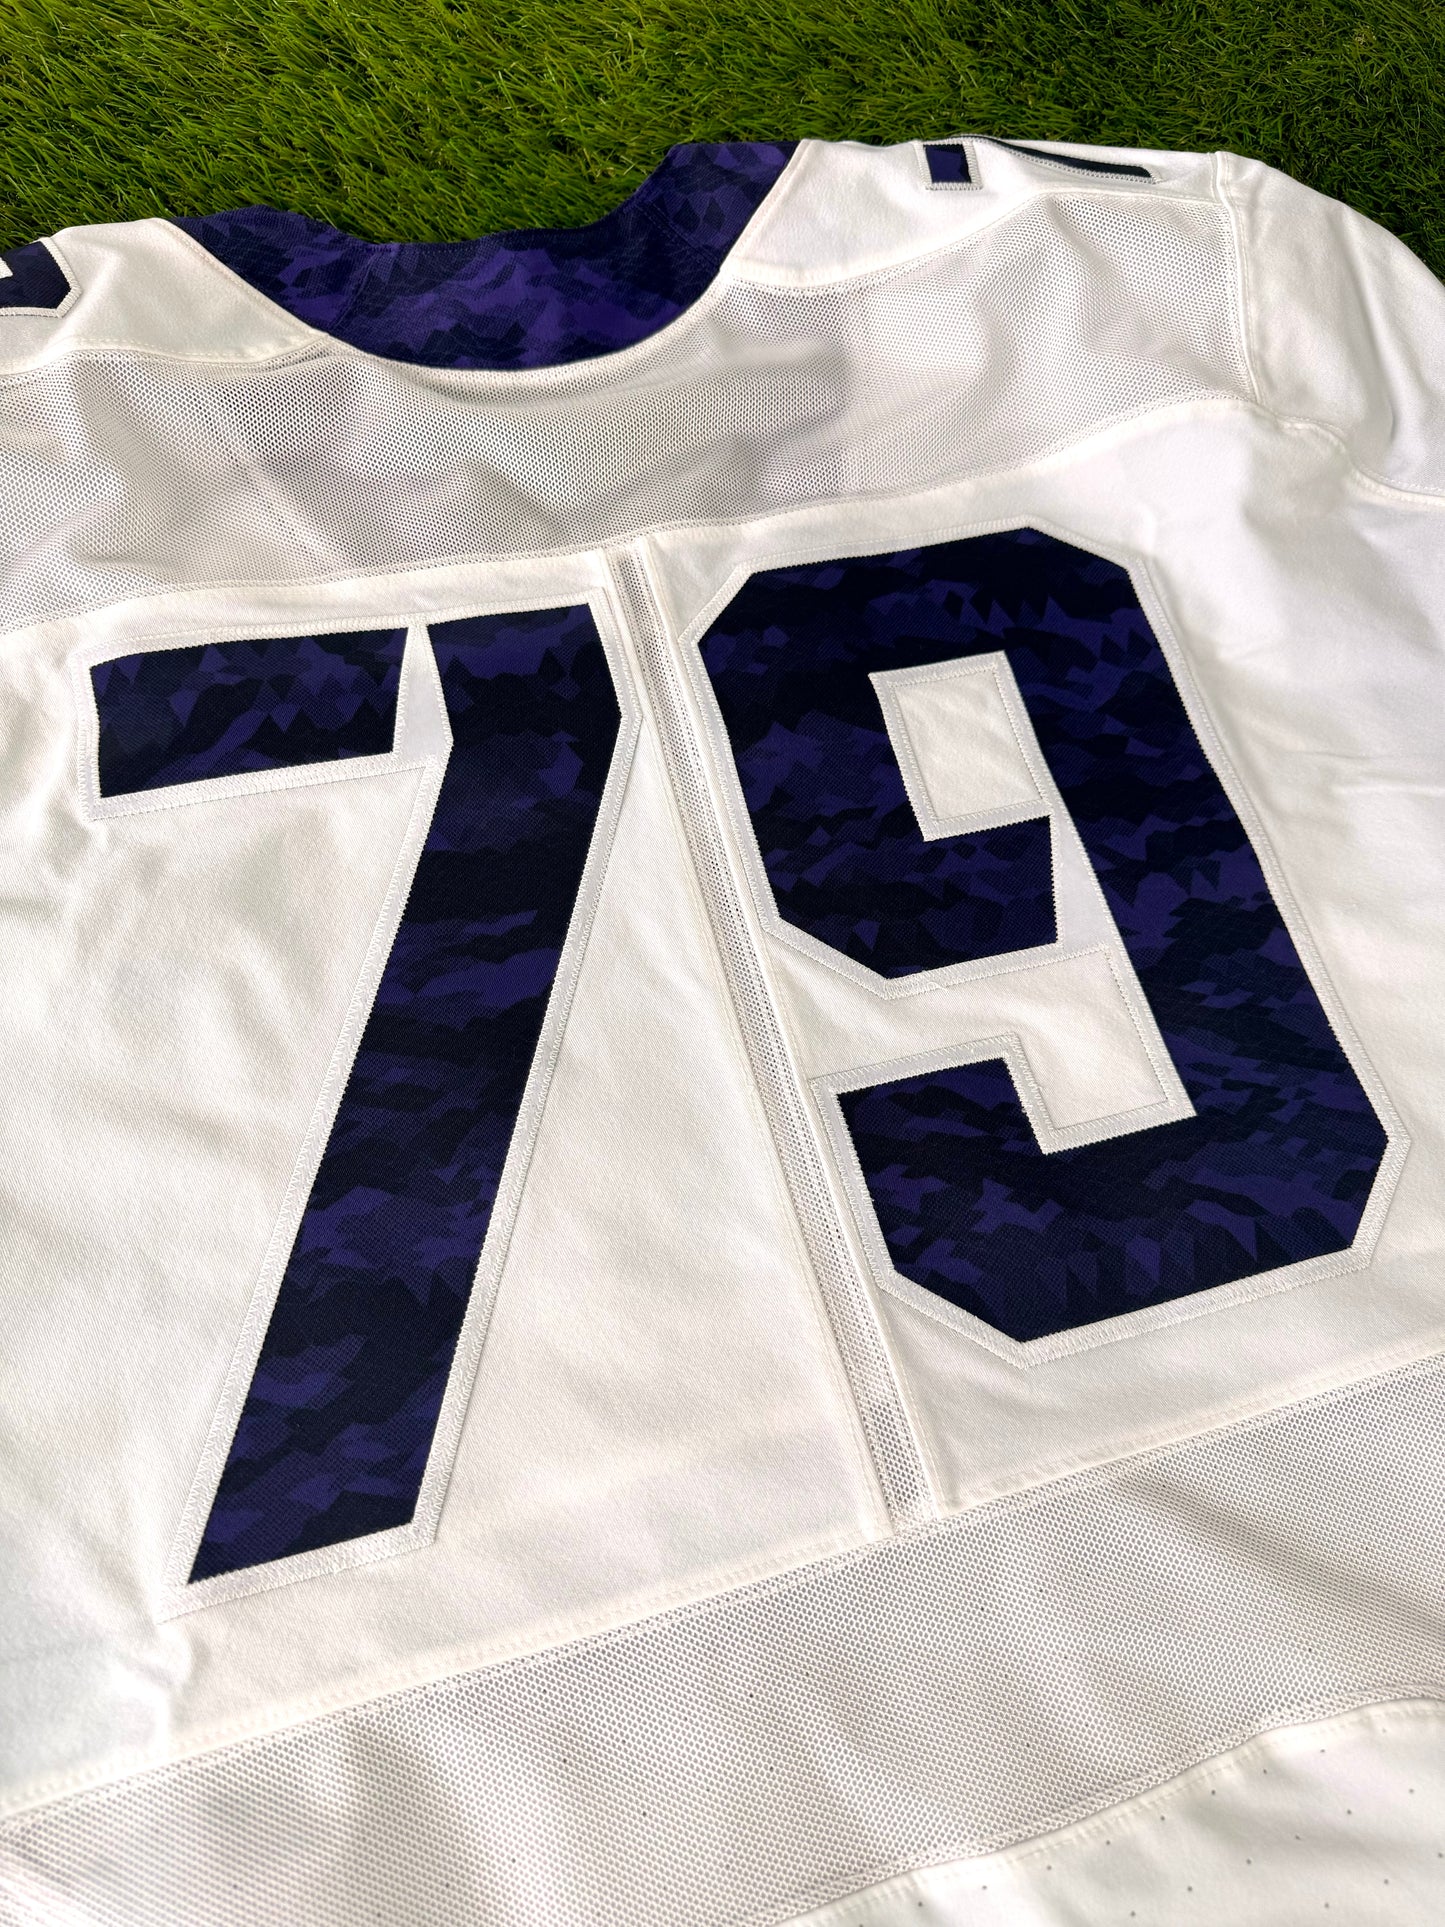 TCU Horned Frogs 2015-2018 Game Worn NCAA College Football Jersey (50/Large)